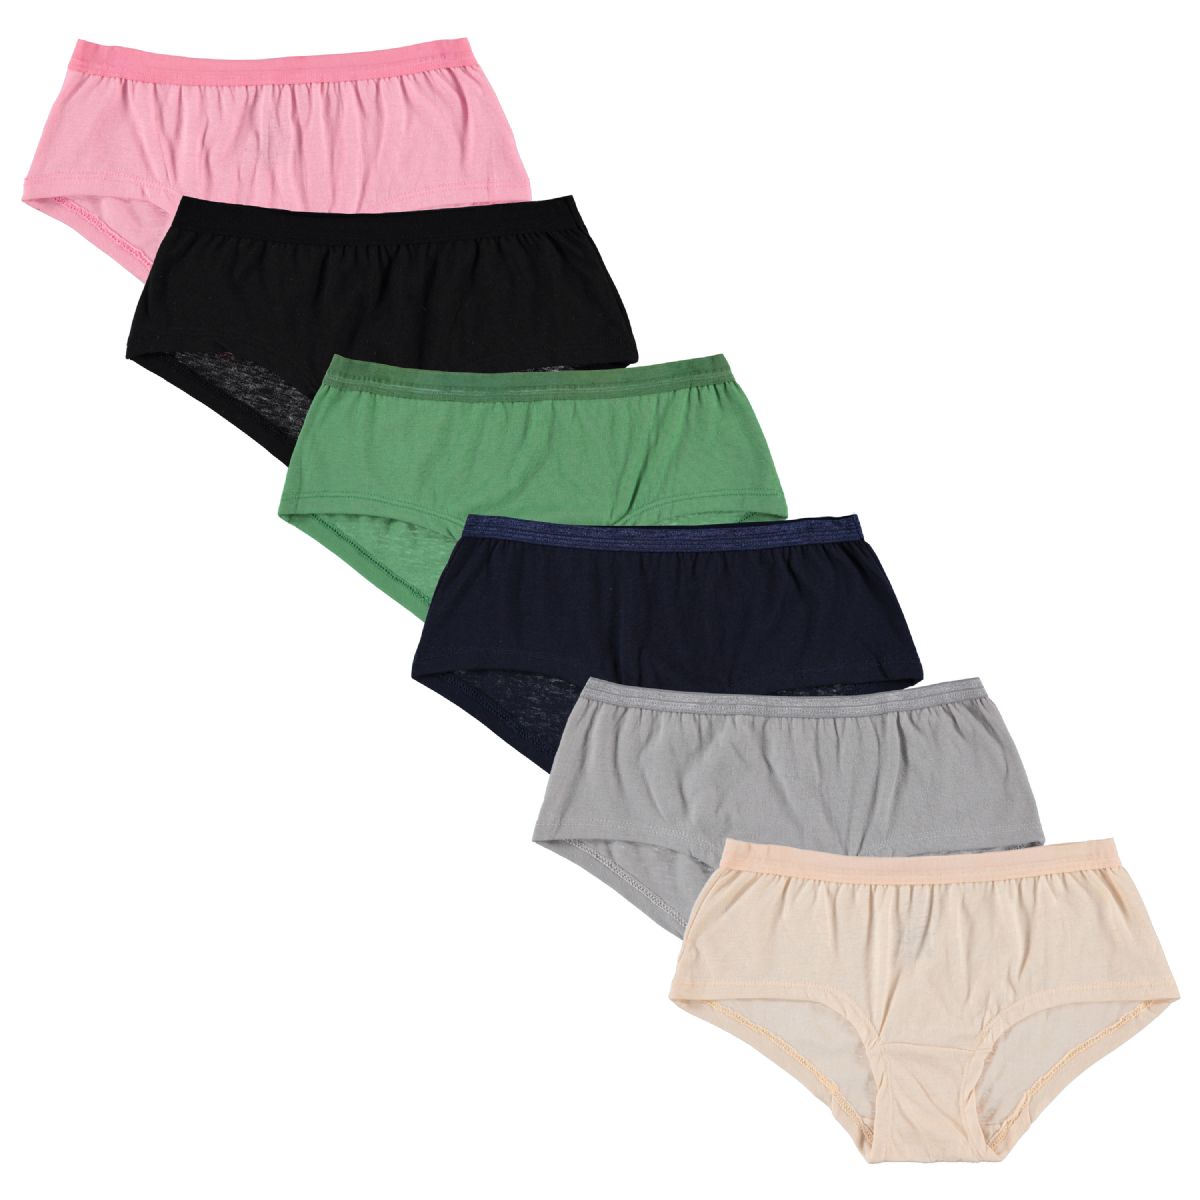 6 Wholesale Yacht & Smith Womens Cotton Blend Underwear In Assorted Colors, Size Medium